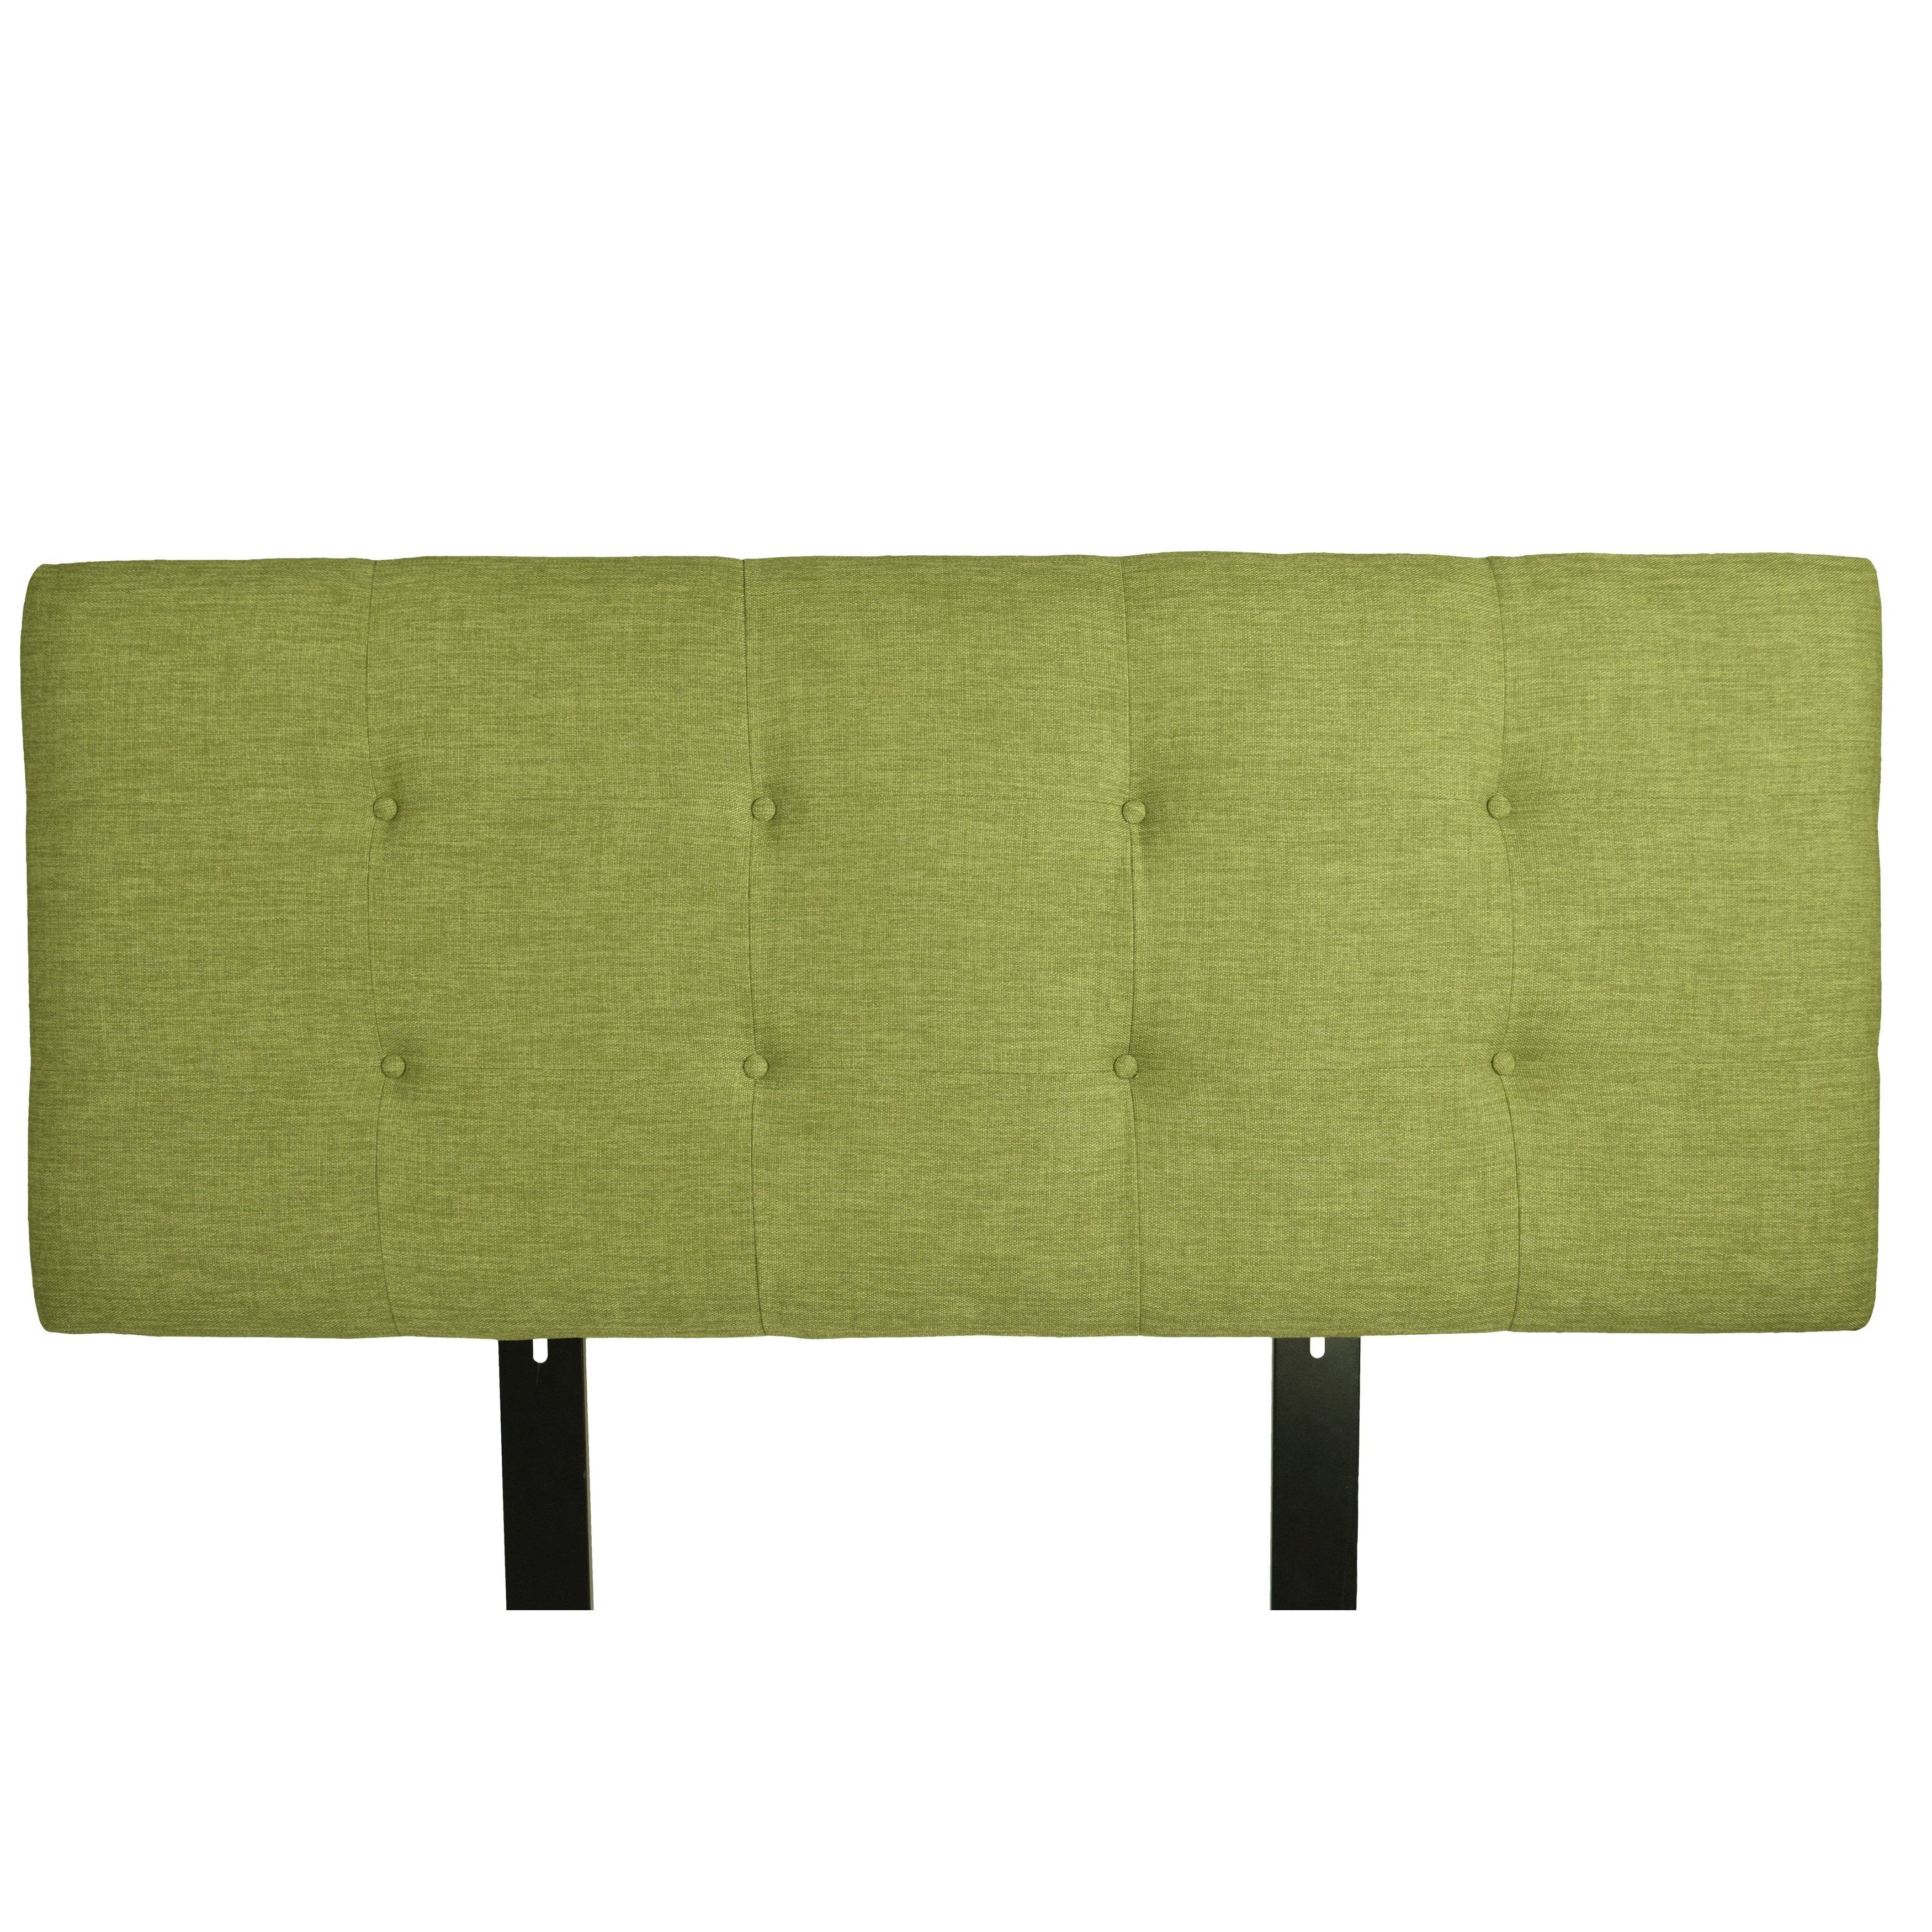 Mjl Furniture Ali Button Tufted Key Largo Grass Upholstered Intended For Most Recently Released Parsons Travertine Top & Elm Base 48x16 Console Tables (View 12 of 18)